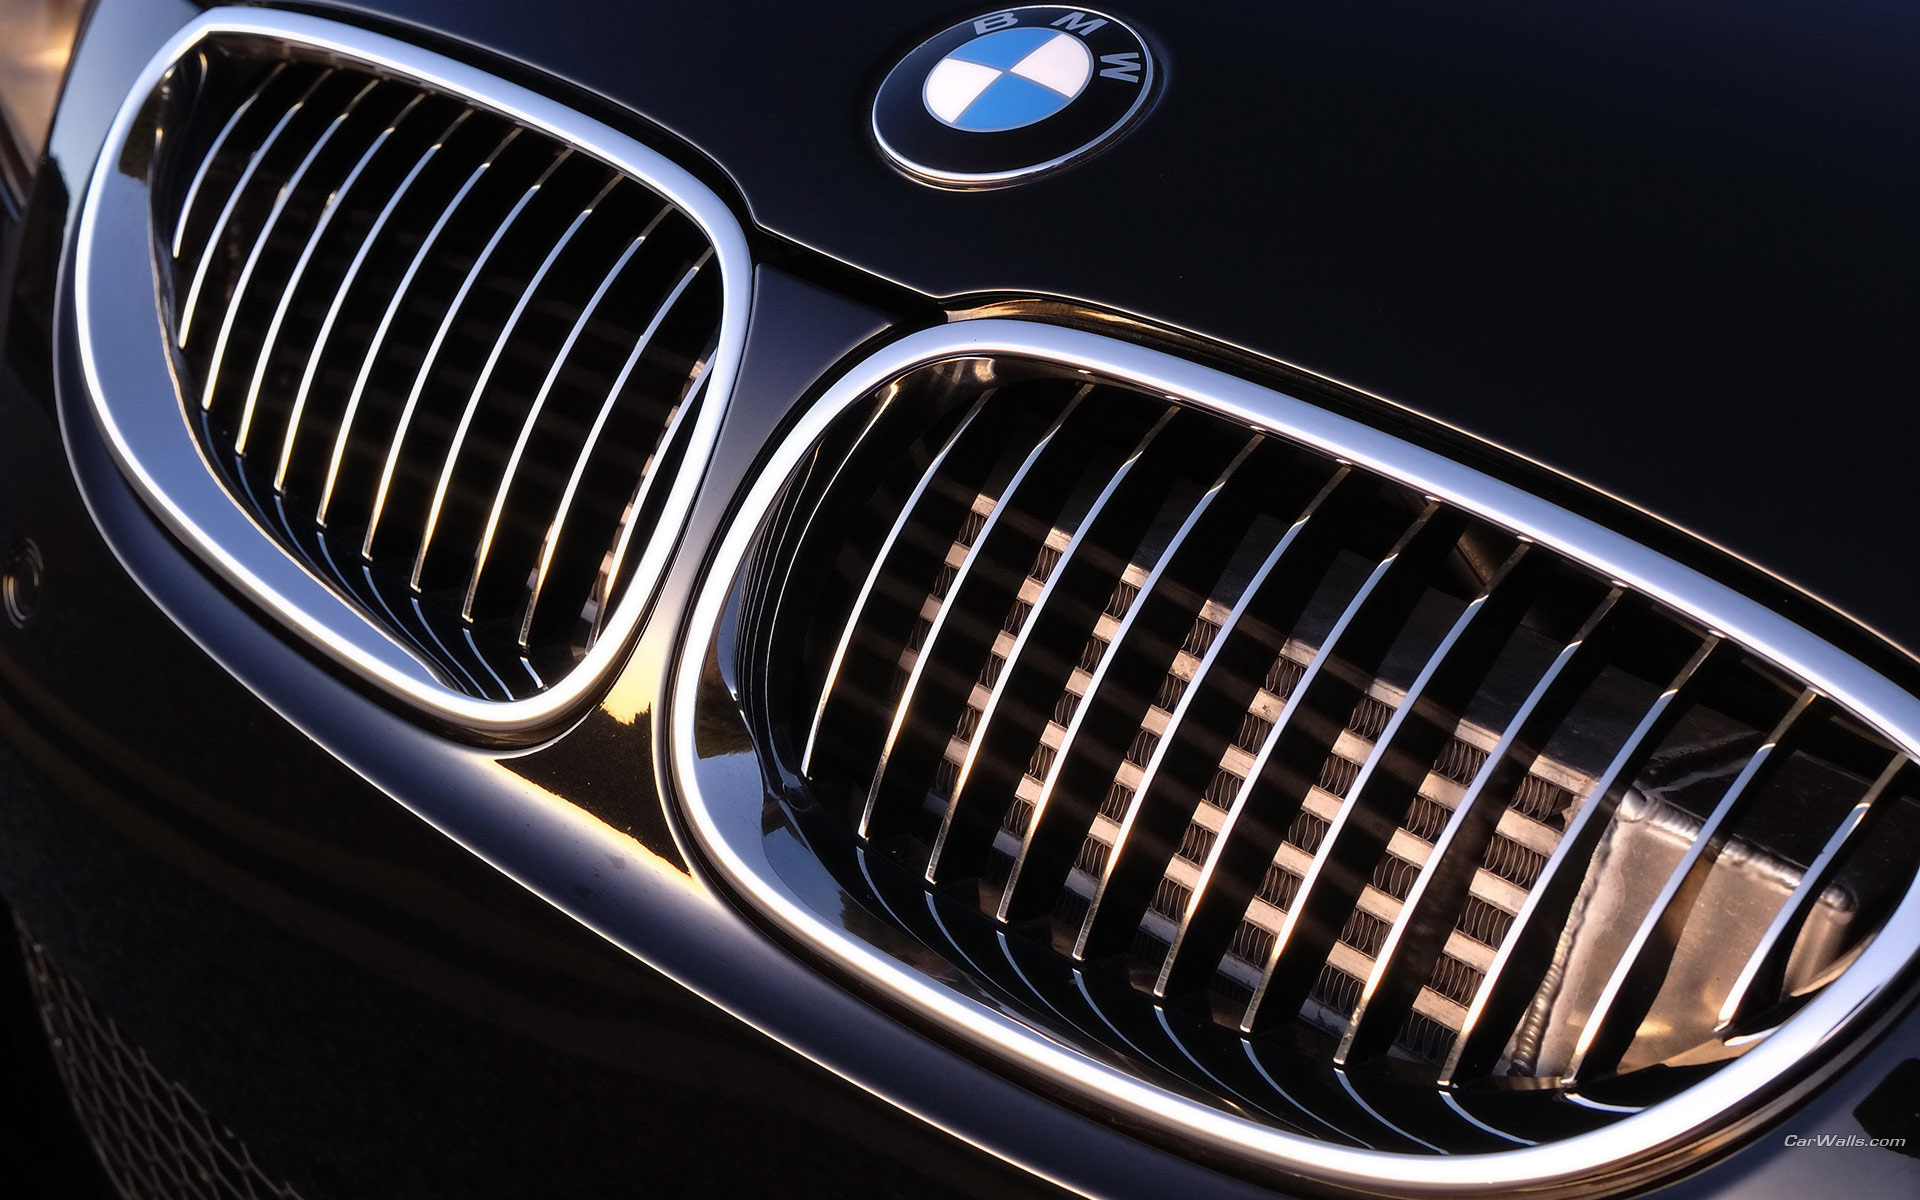 Download full size M5 turbo grille Bmw wallpaper / 1920x1200